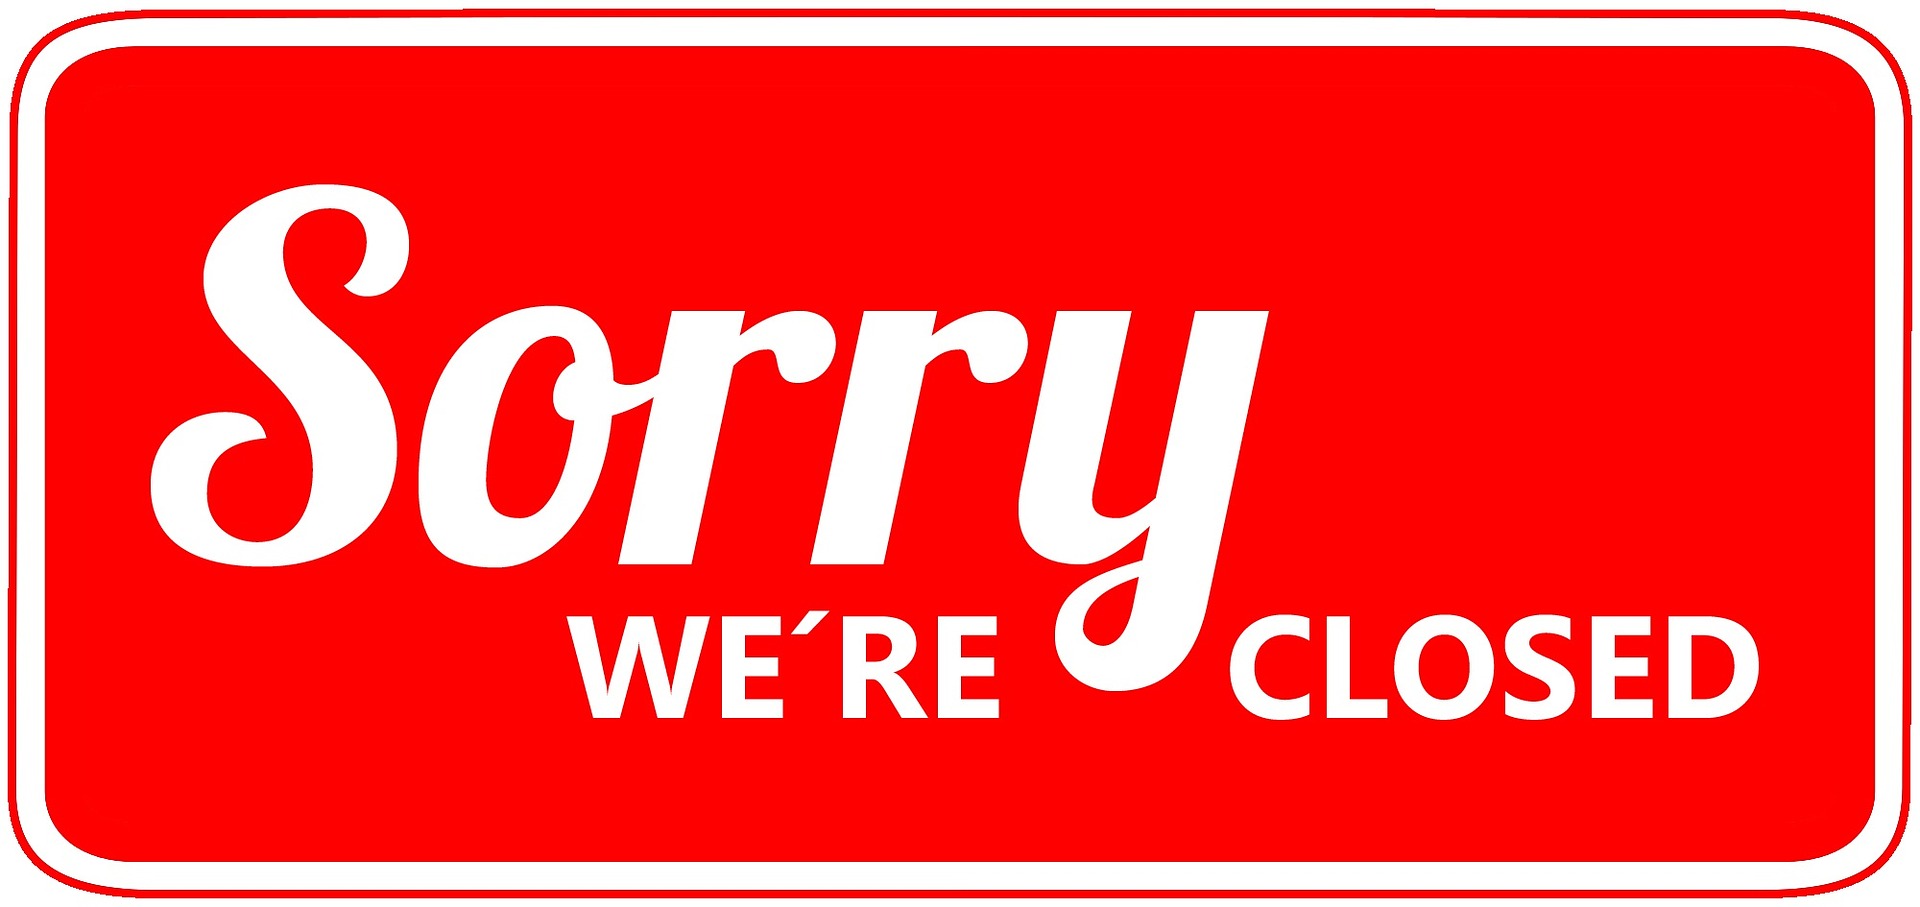 Red sign that says "Sorry We're Closed"